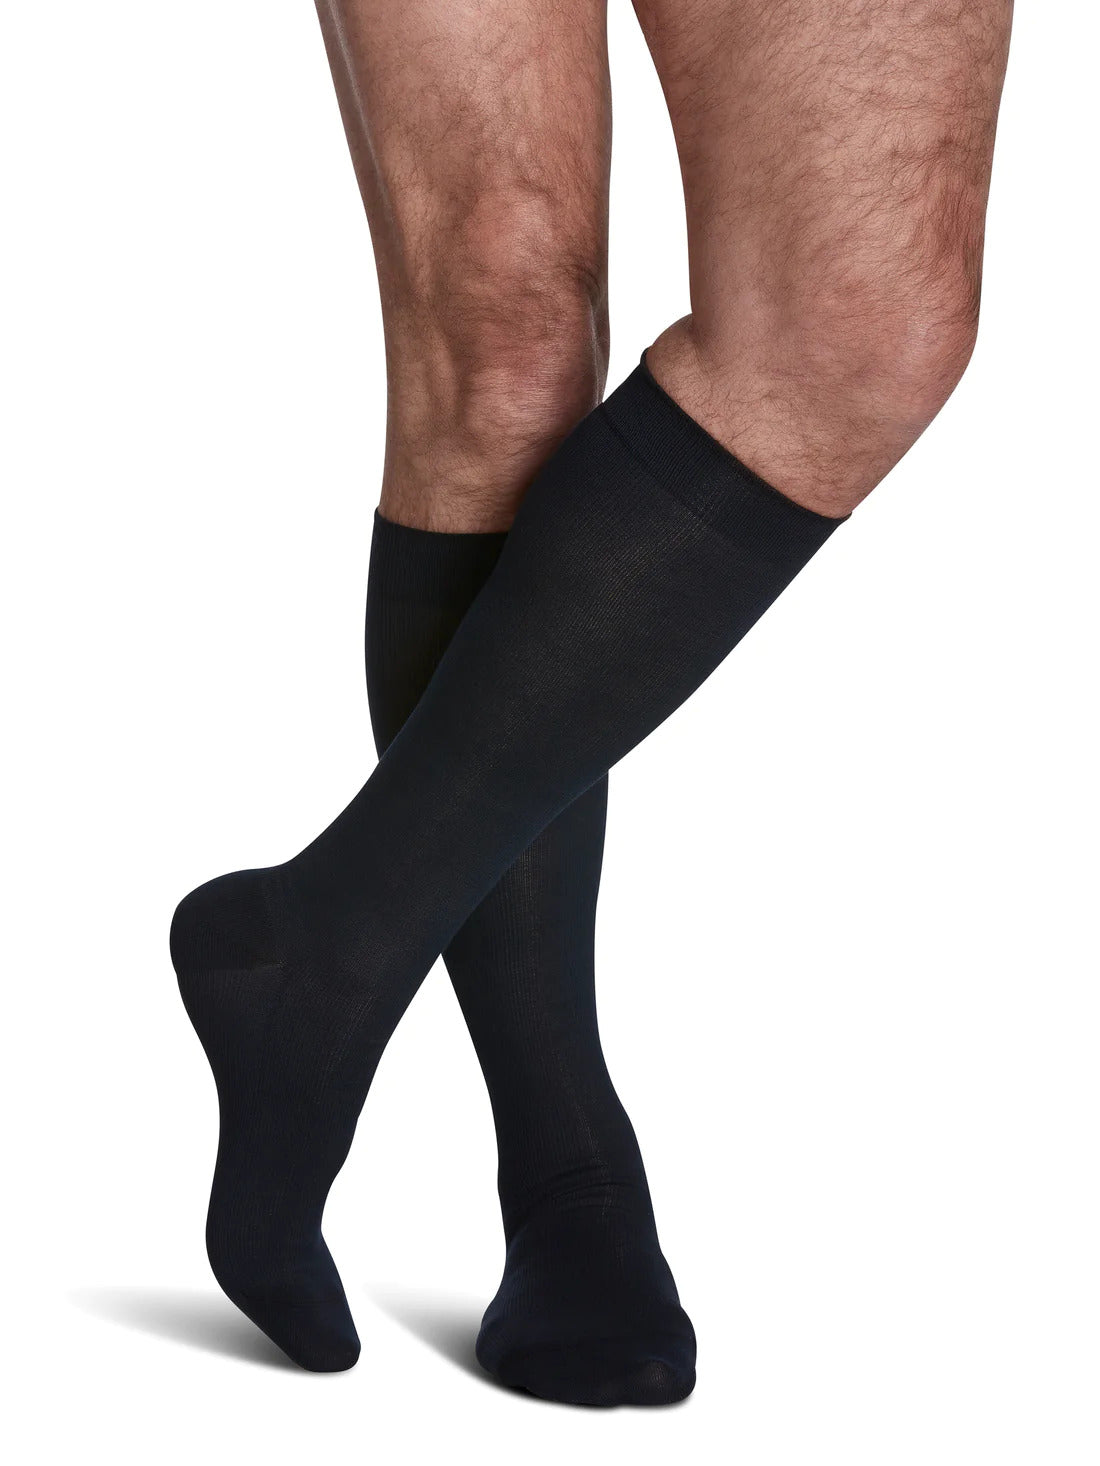 Sea Island Cotton Well Being Compression Socks for Men by Sigvaris 15 - 20 mmHg